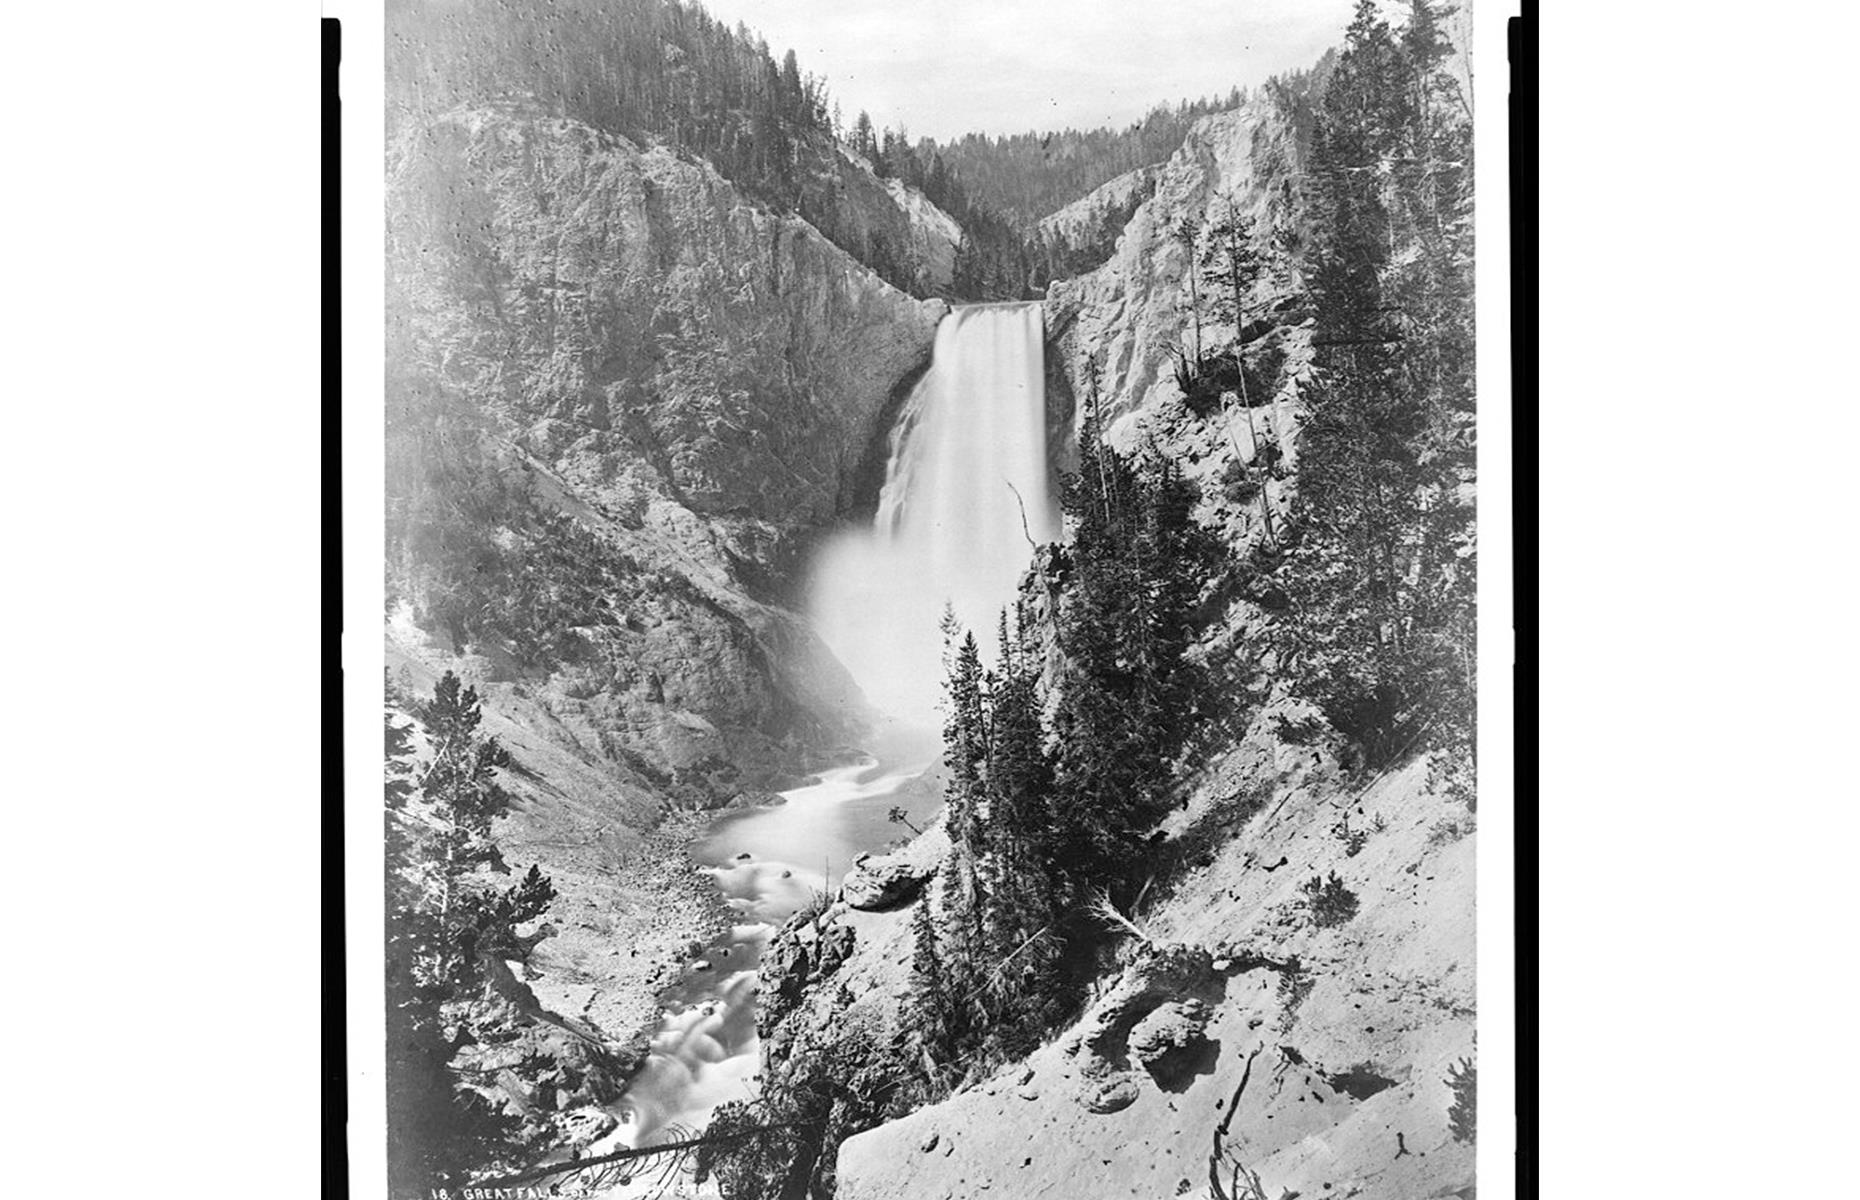 Jackson's Yellowstone portfolio included this breathtaking shot of Lower Falls, taken in 1871. He also captured the thundering Upper Falls, Mammoth Hot Springs and Mary Bay on Yellowstone Lake, among other highlights.